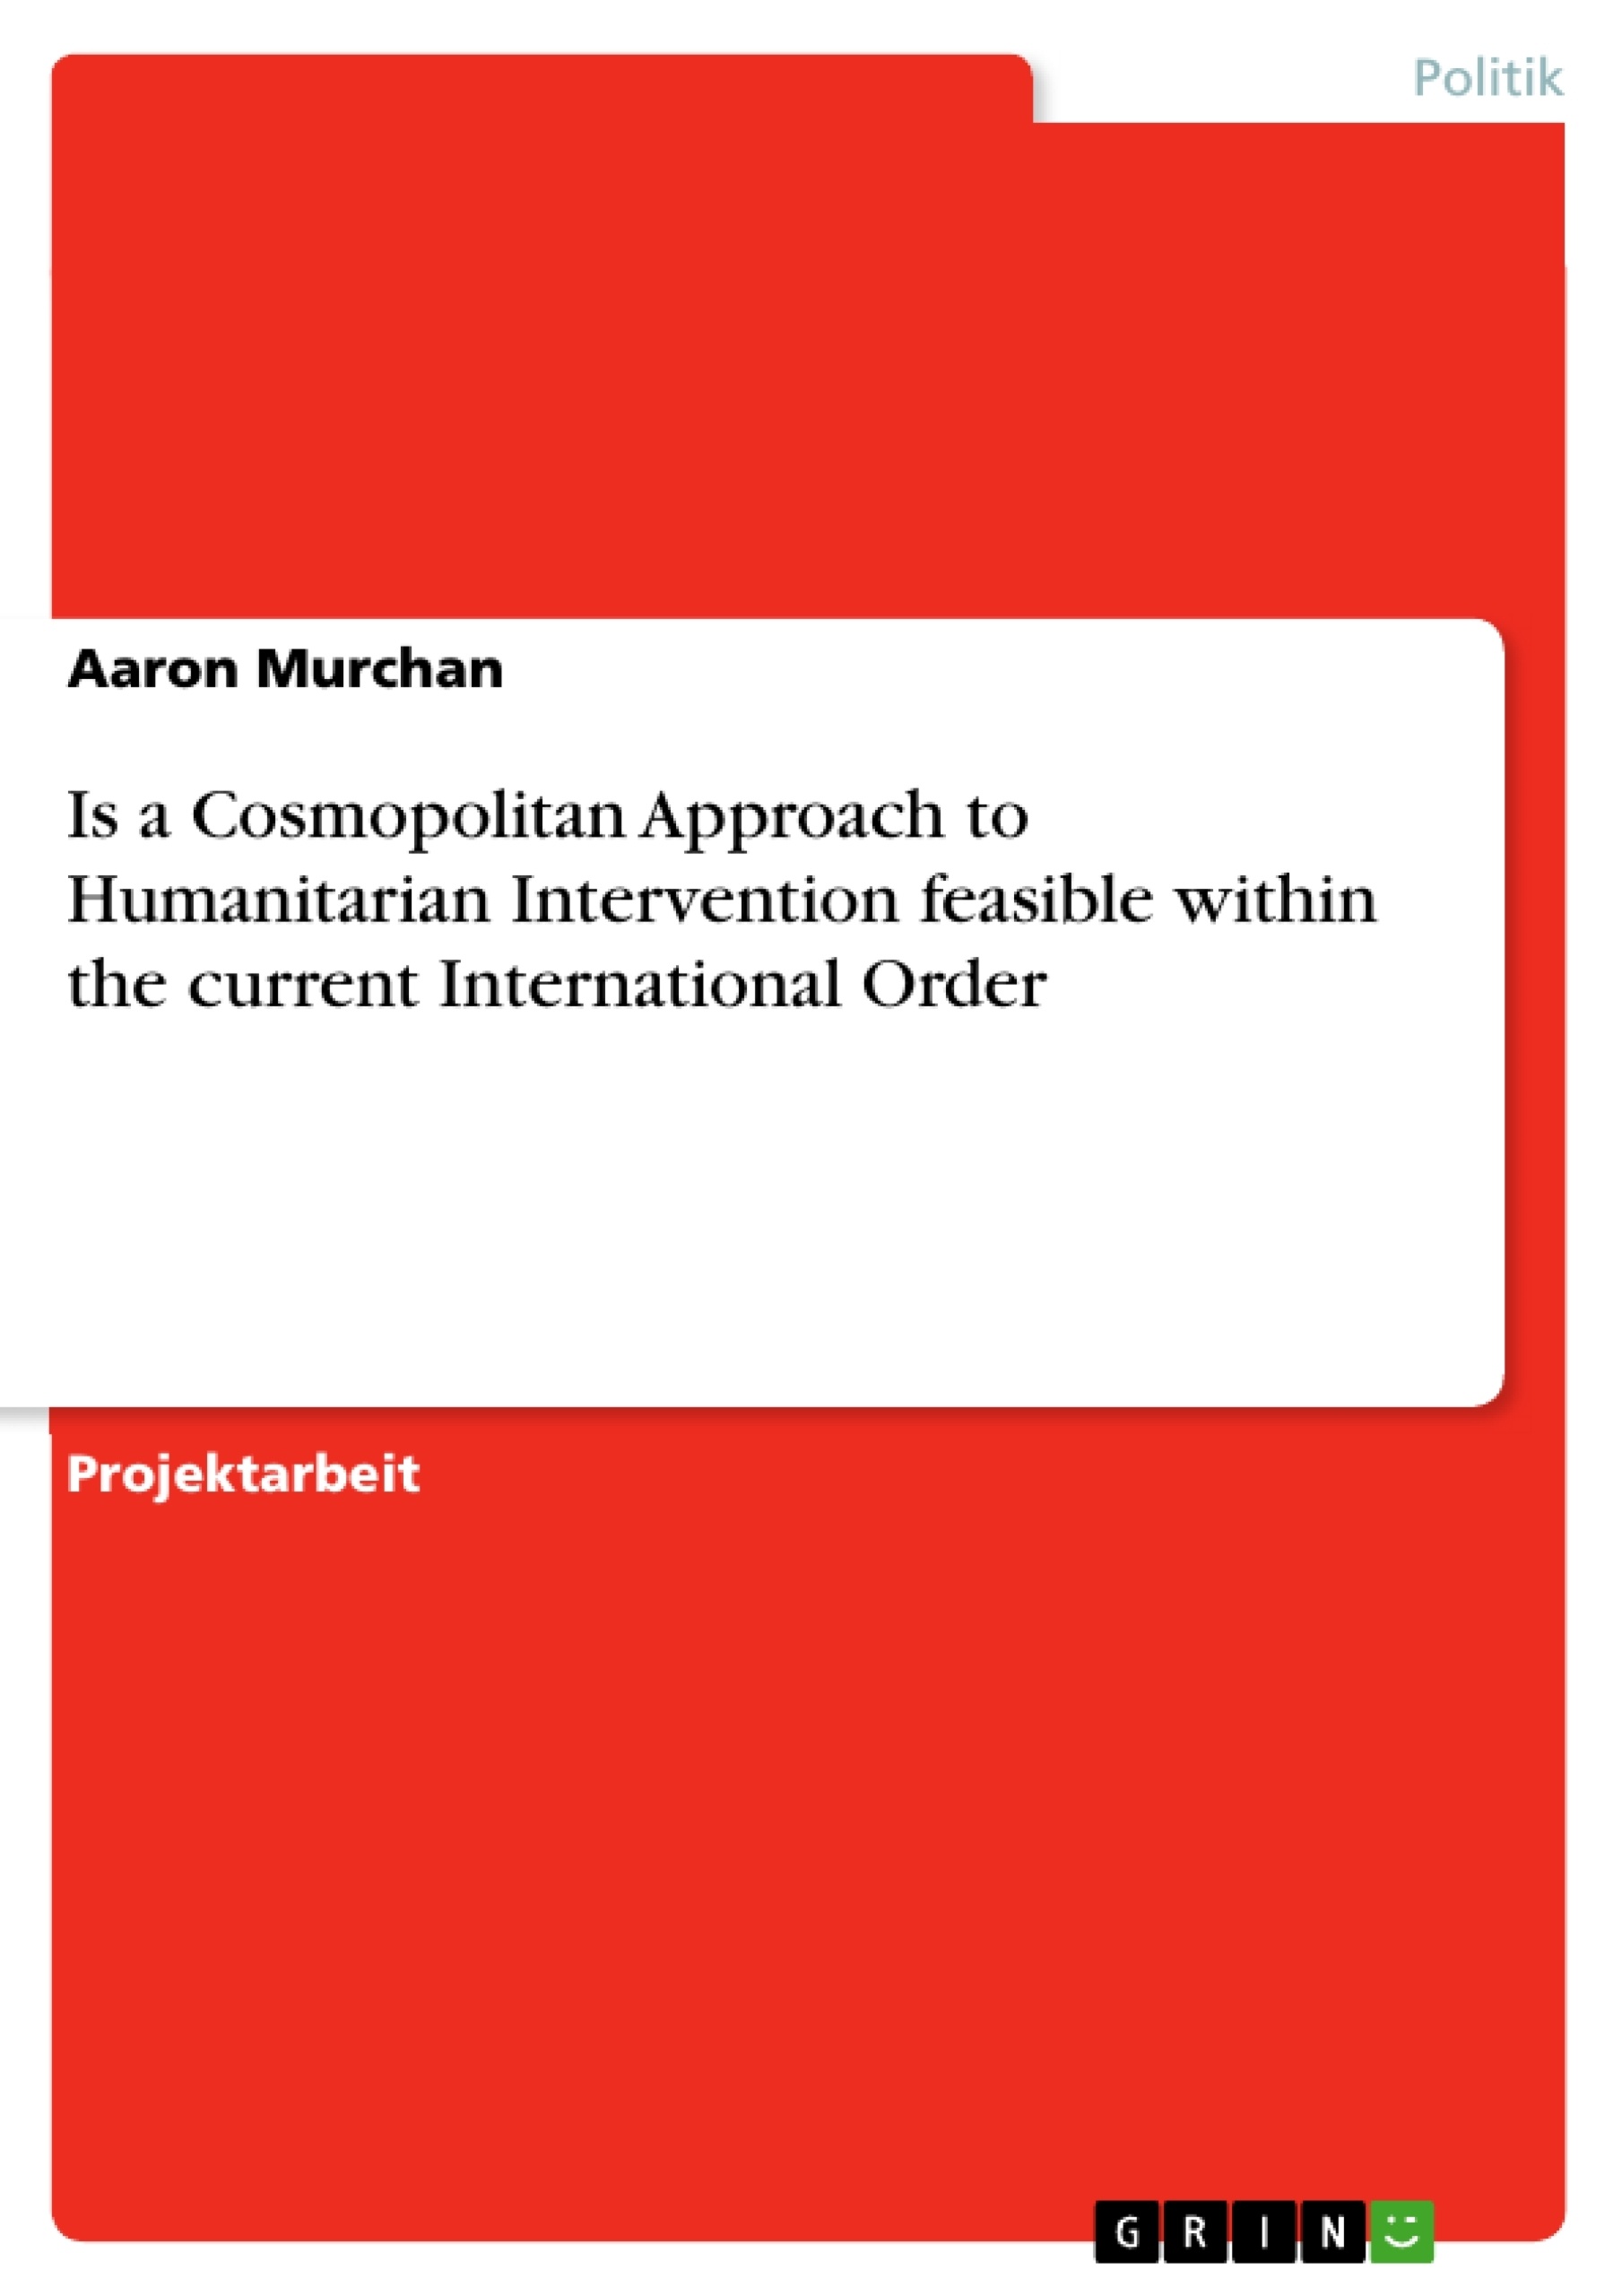 Titre: Is a Cosmopolitan Approach to Humanitarian Intervention feasible within the current International Order